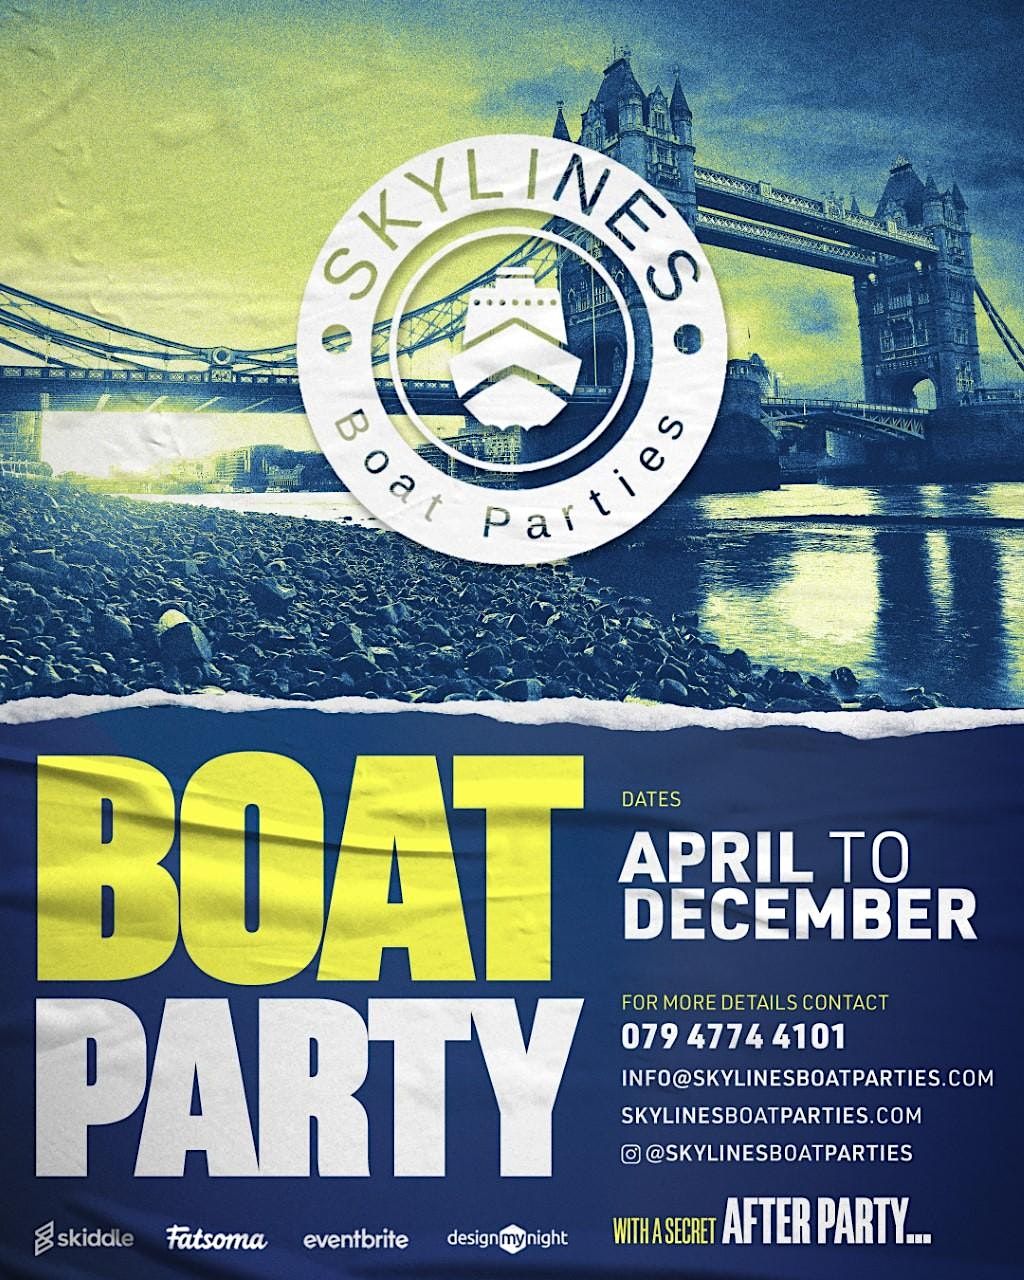 Copy of SKYLINES BOAT PARTY WITH A SECRET AFTER PARTY